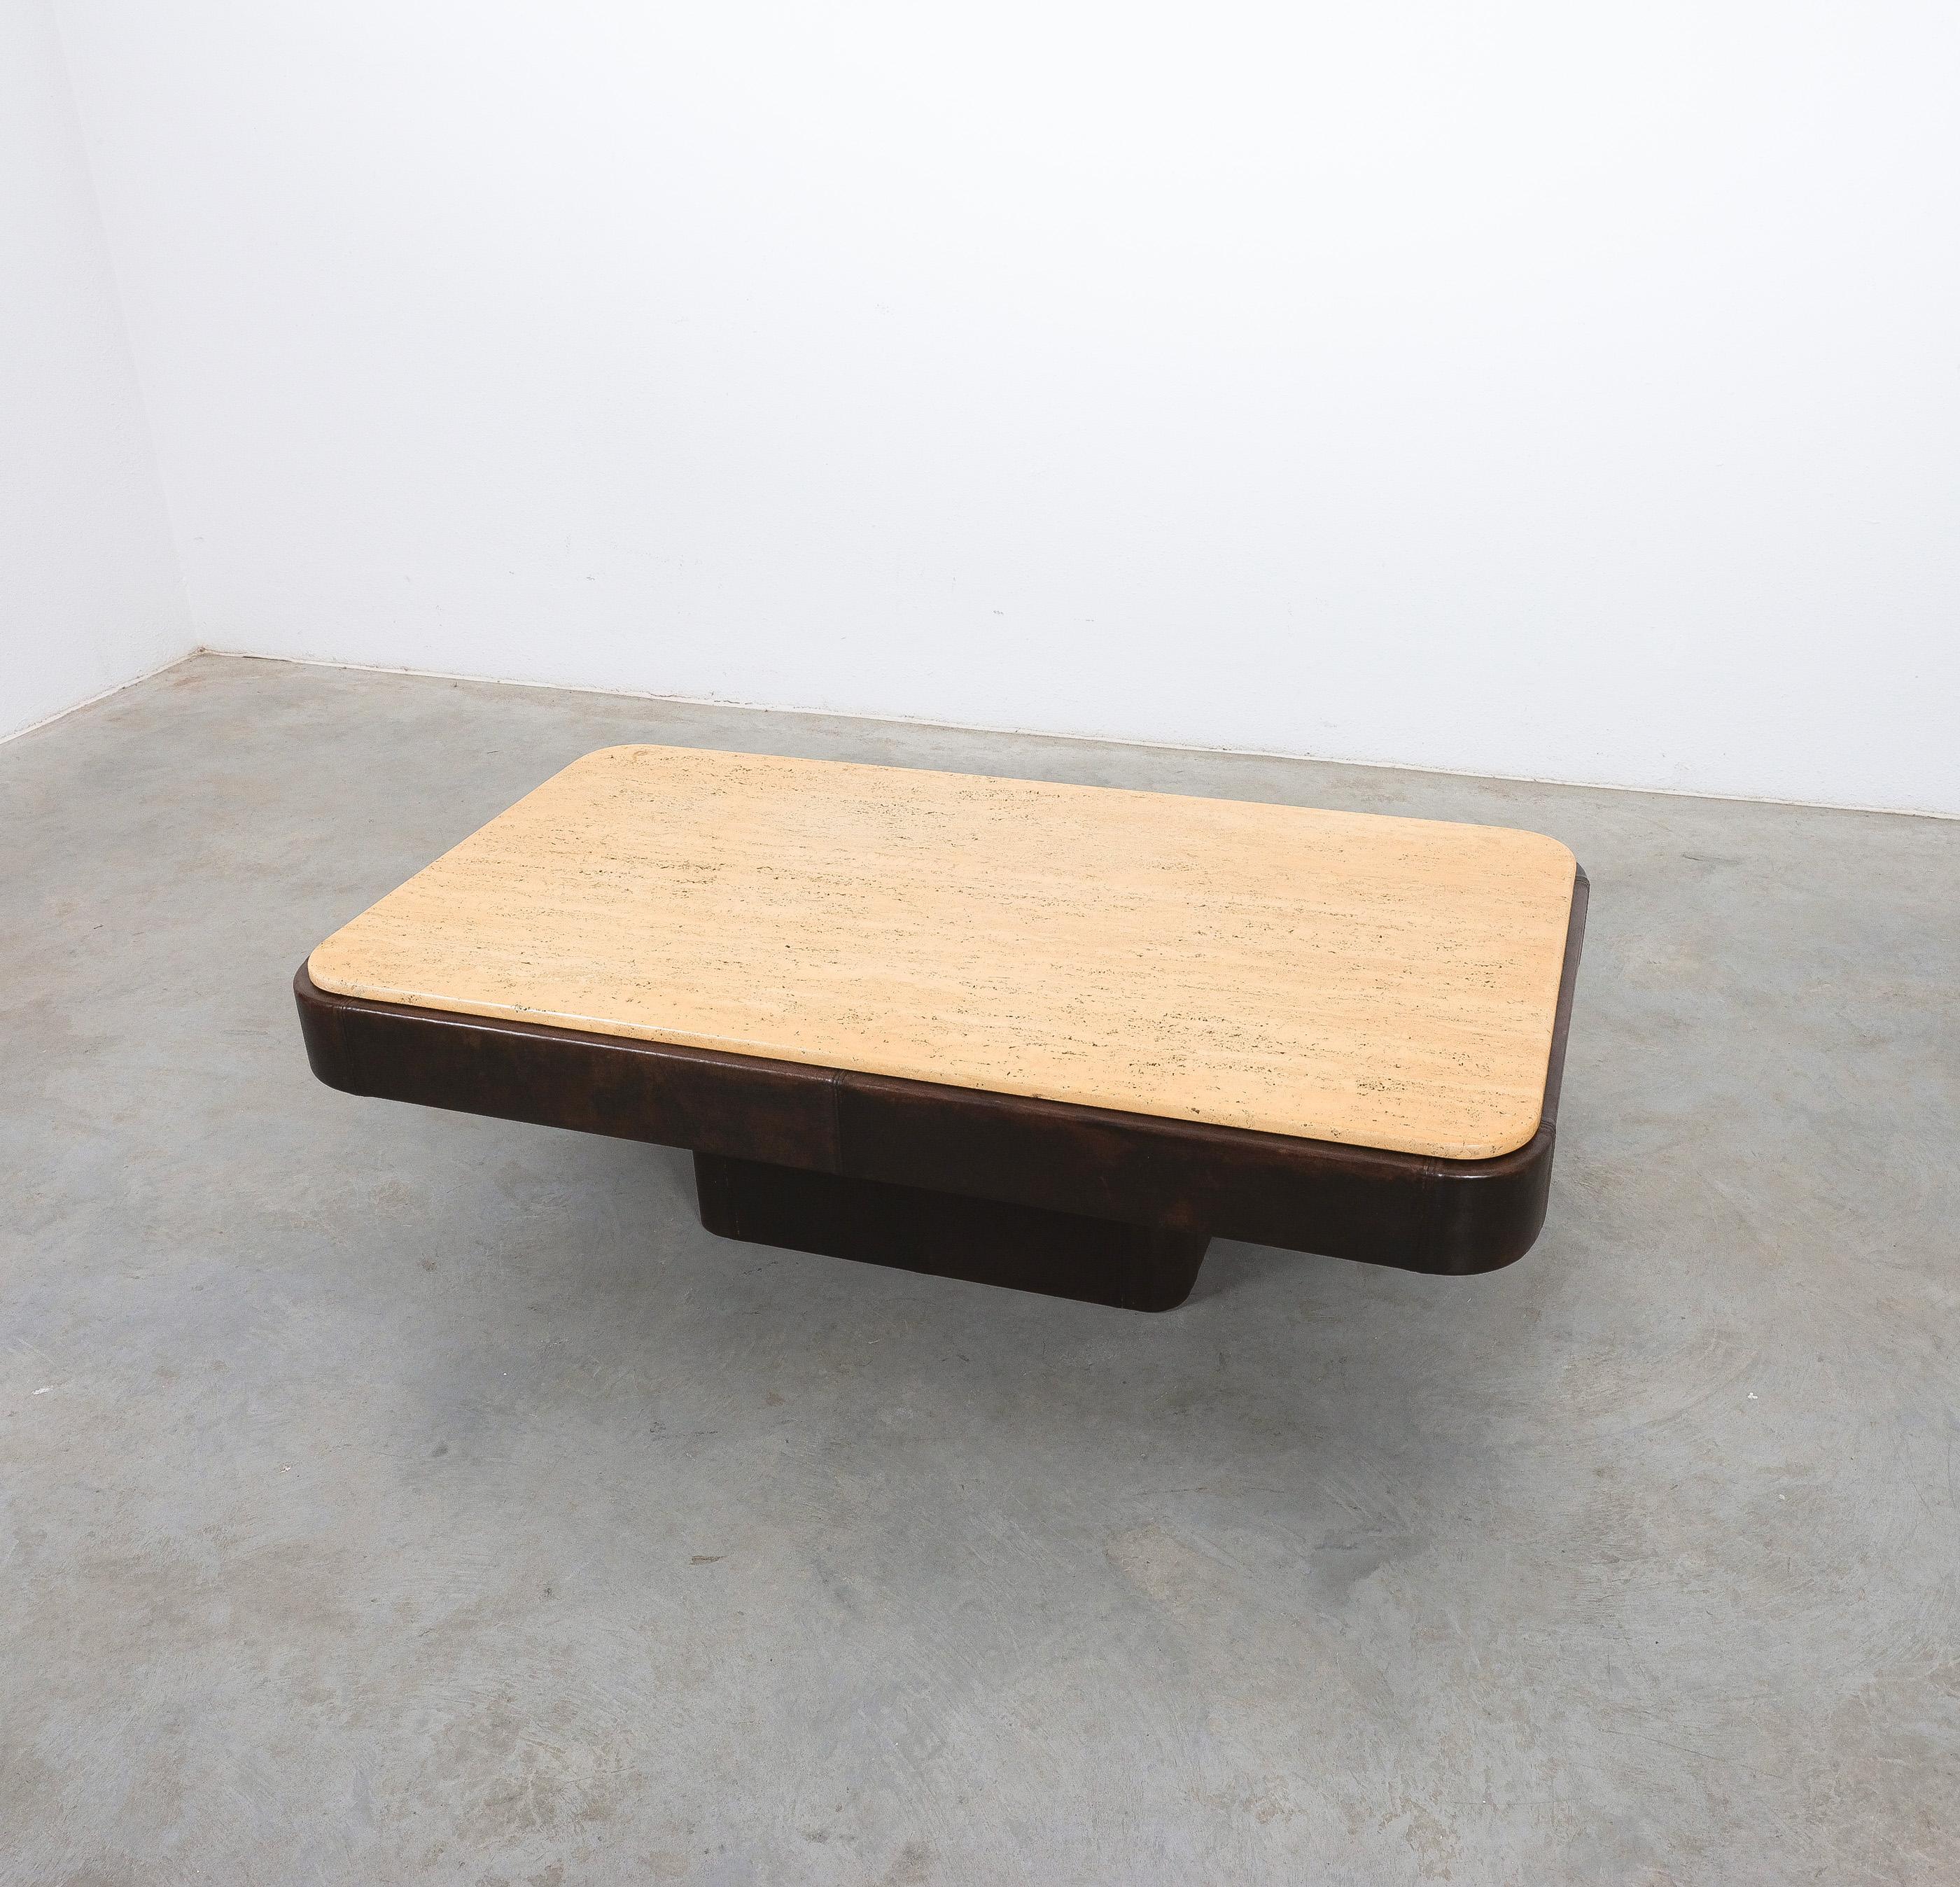 De Sede leather table with travertine stone top in very good condition, Switzerland 1970
Dimensions are: 53